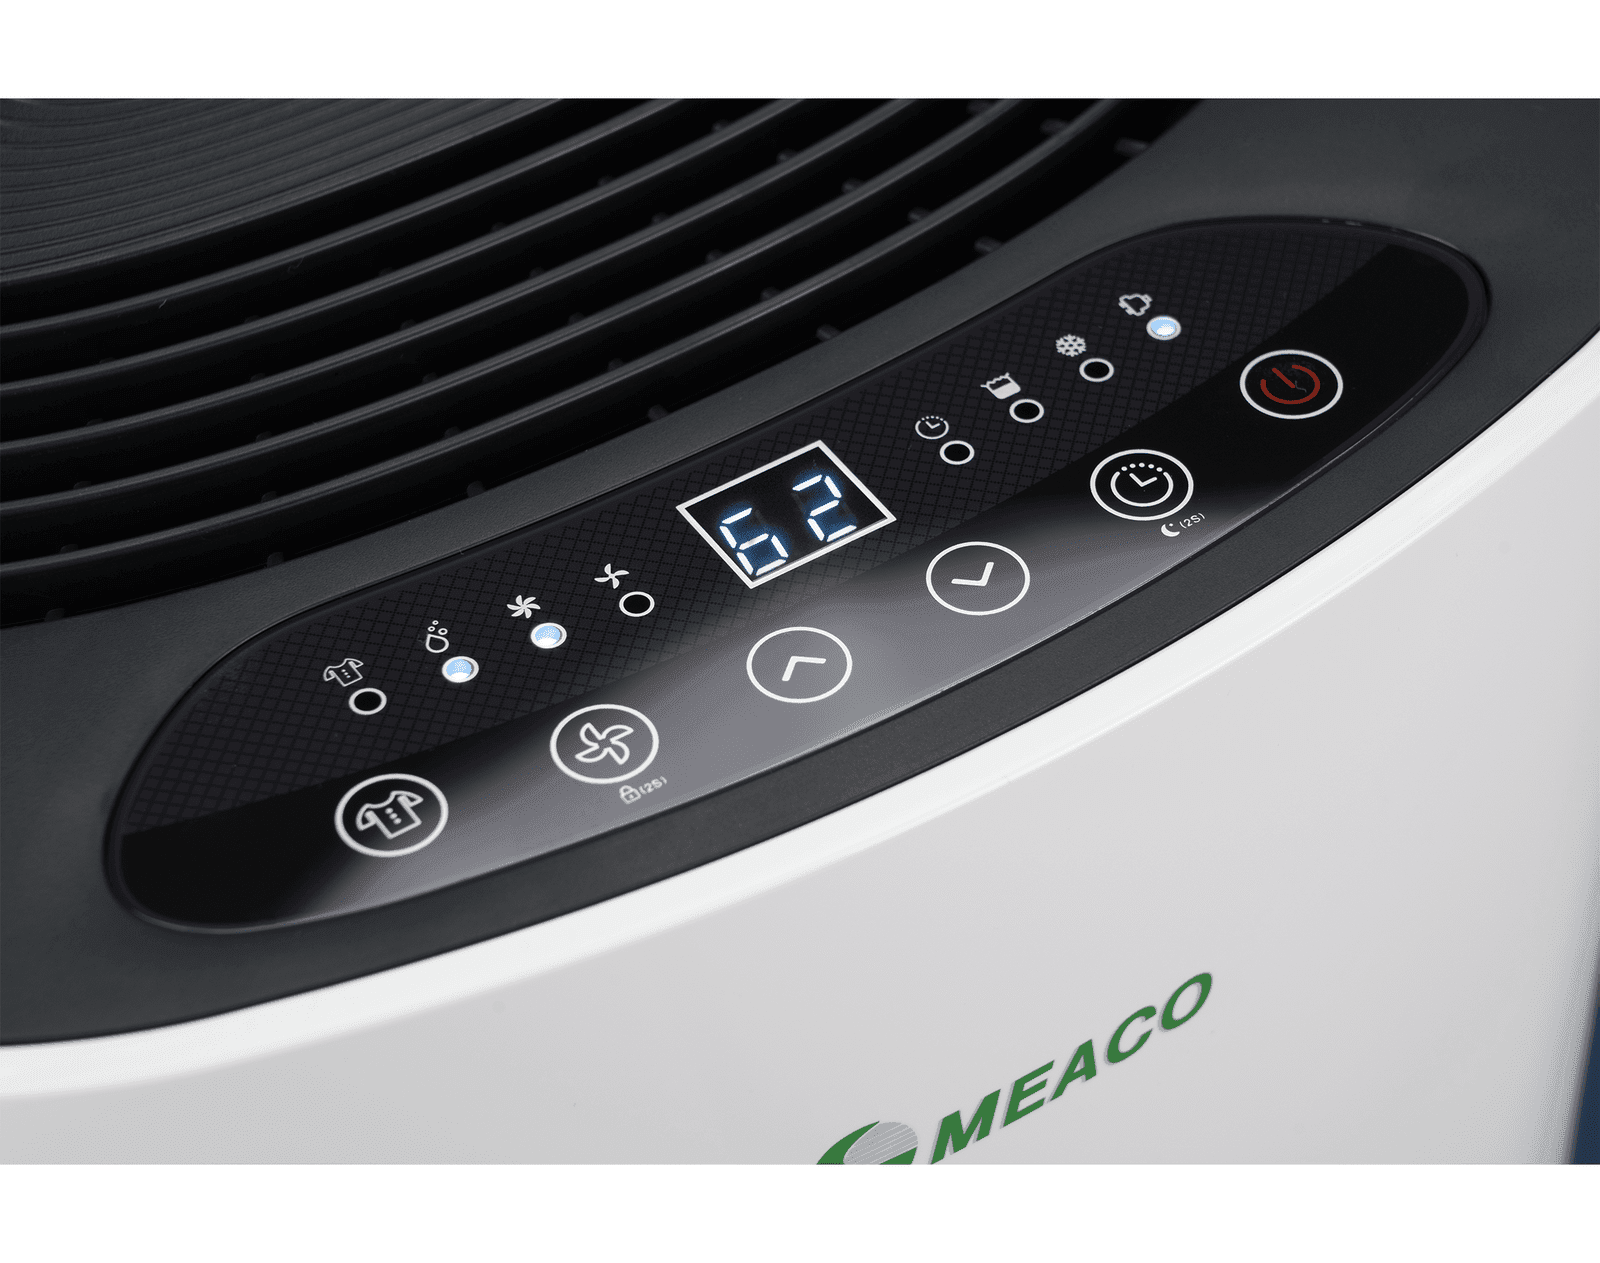 The Surprising Reality: Why Multiple Dehumidifiers Aren't Ideal for Small Spaces